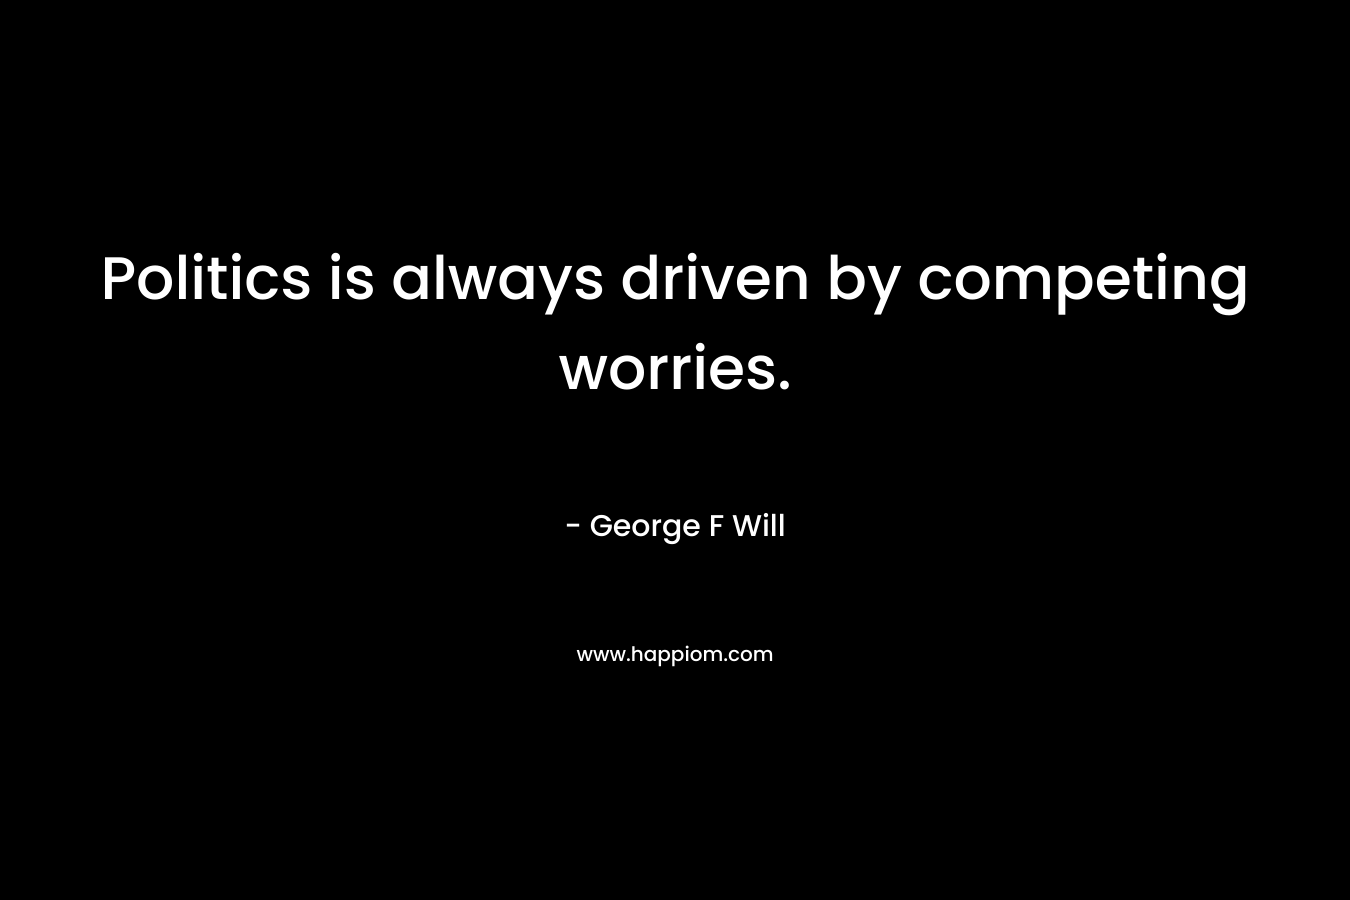 Politics is always driven by competing worries.